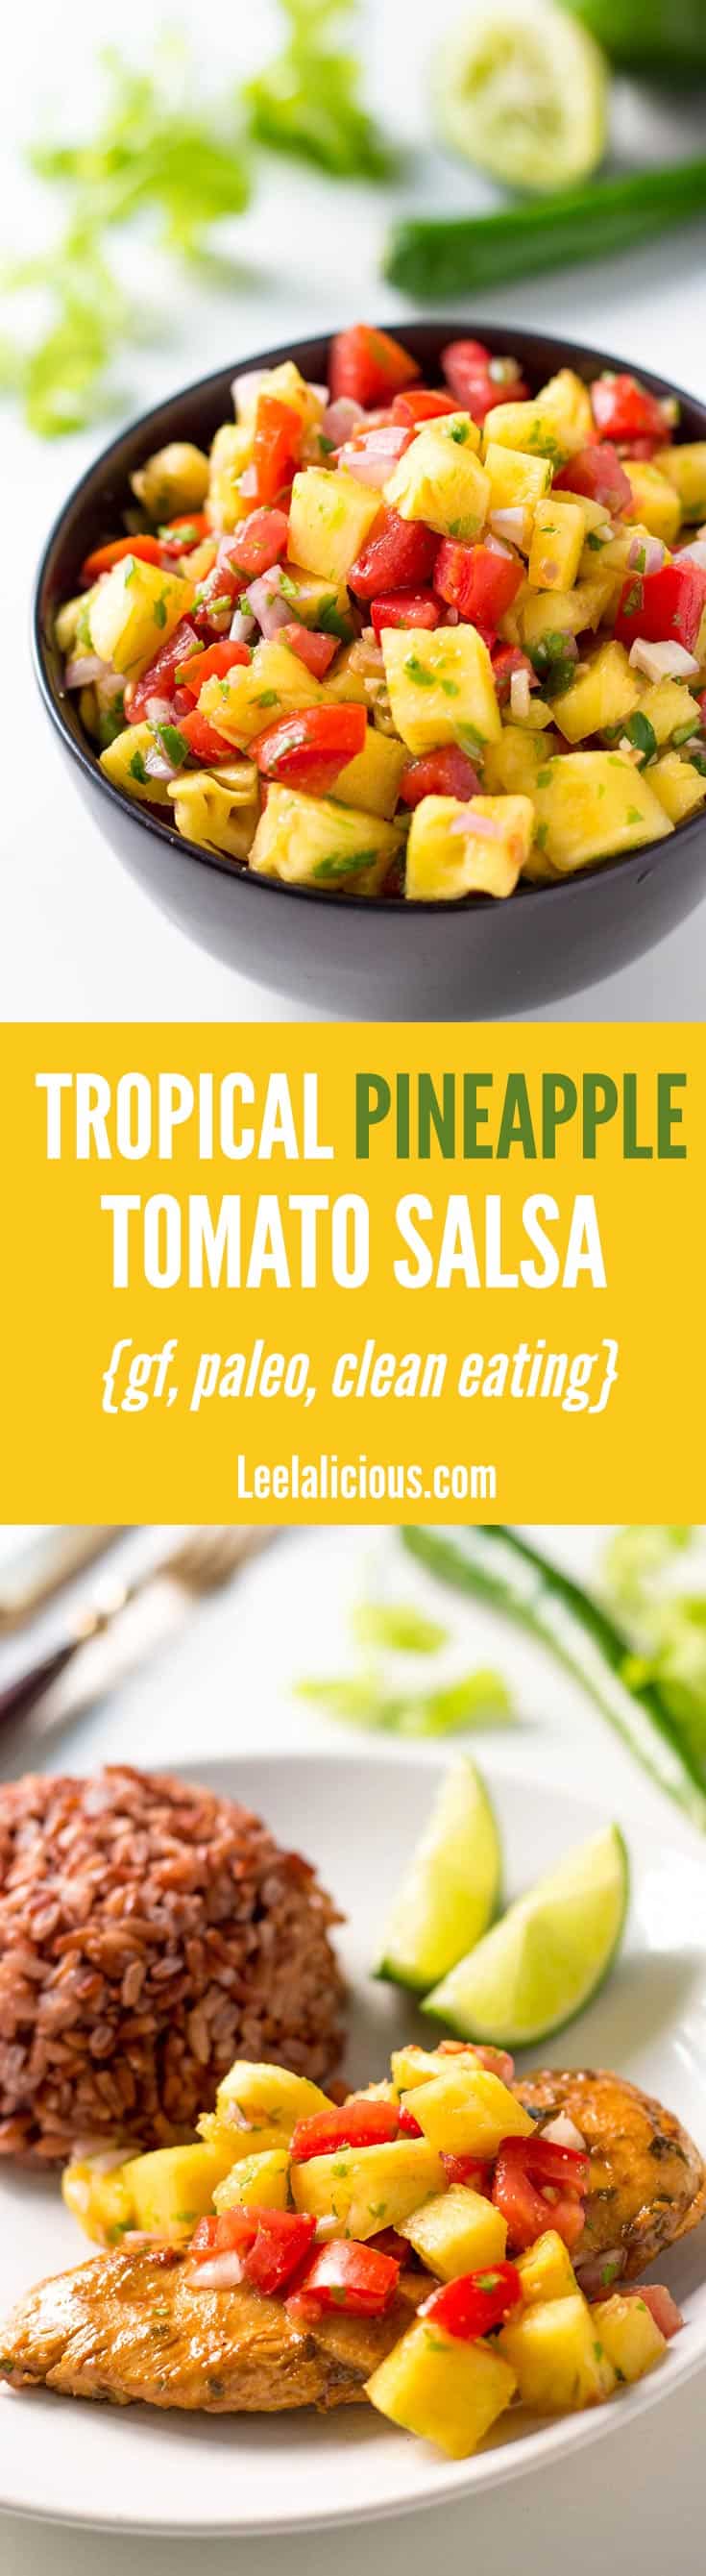 This Tropical Pineapple Tomato Salsa makes a flavorful appetizer with tortilla chips or a delicious topping for tacos or grilled chicken. This clean eating recipe is vegan, gluten free and paleo friendly.